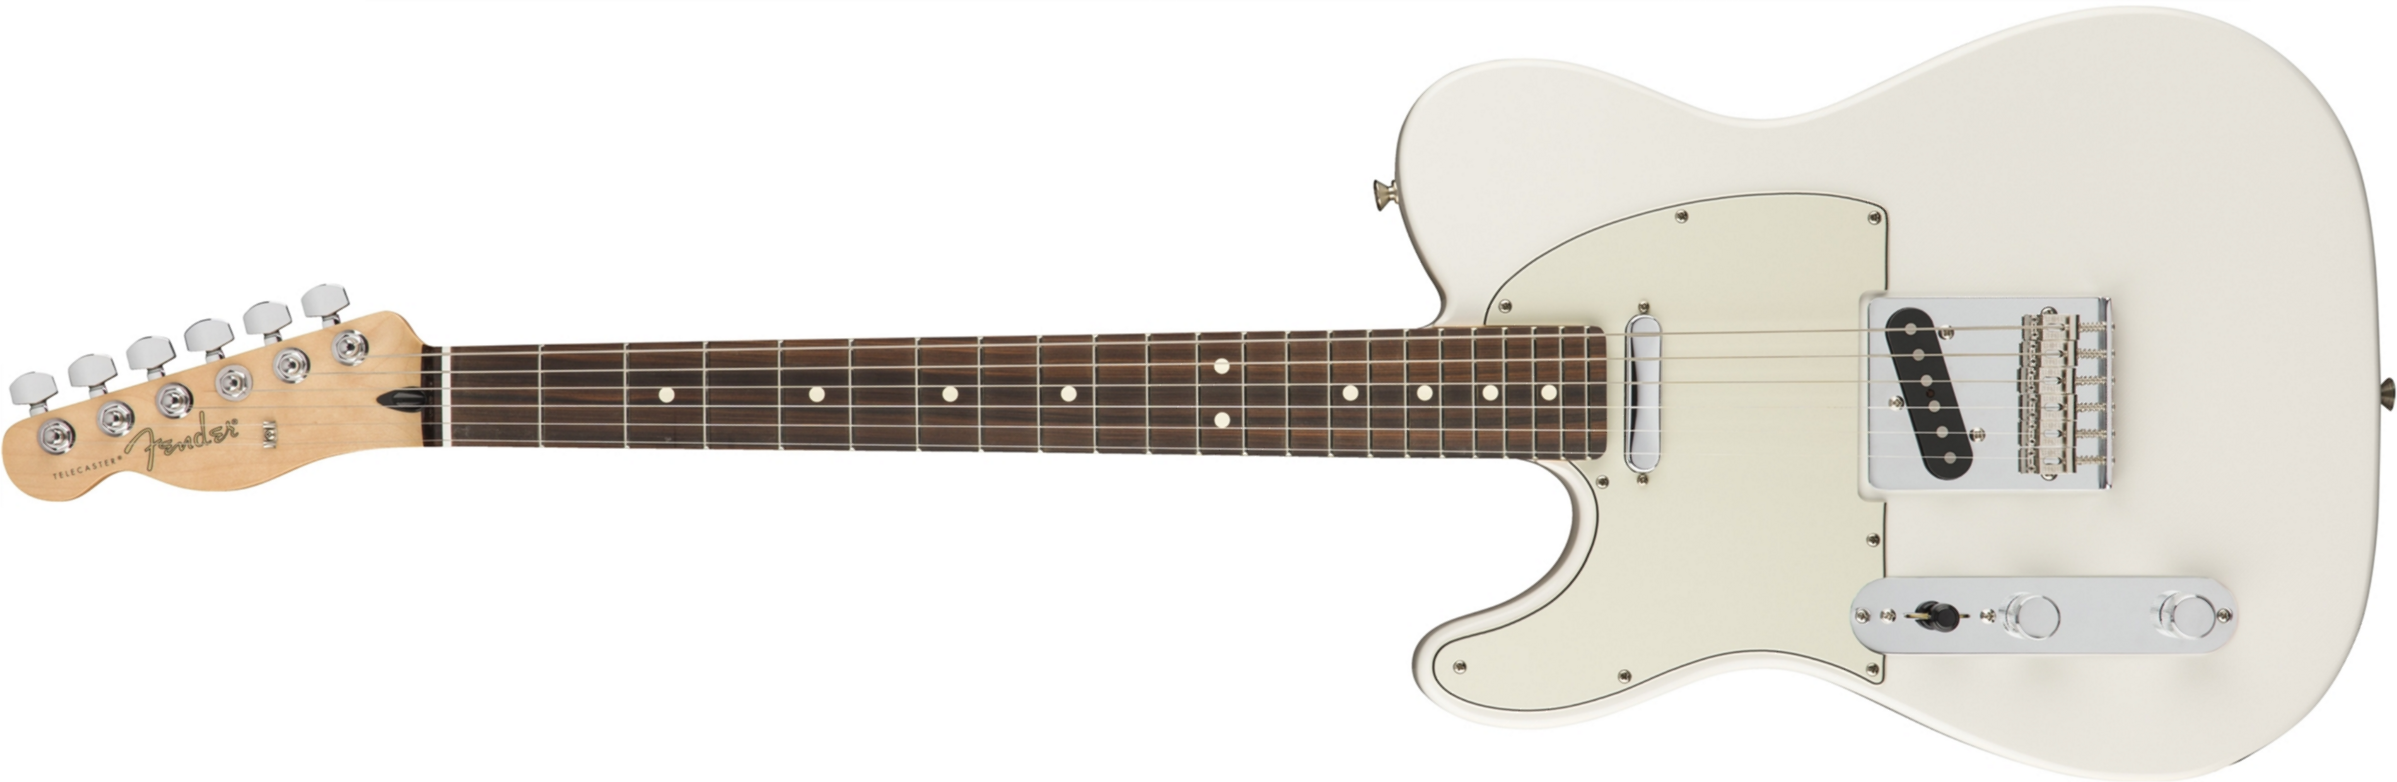 Fender Tele Player Lh Gaucher Mex Ss Pf - Polar White - Left-handed electric guitar - Main picture